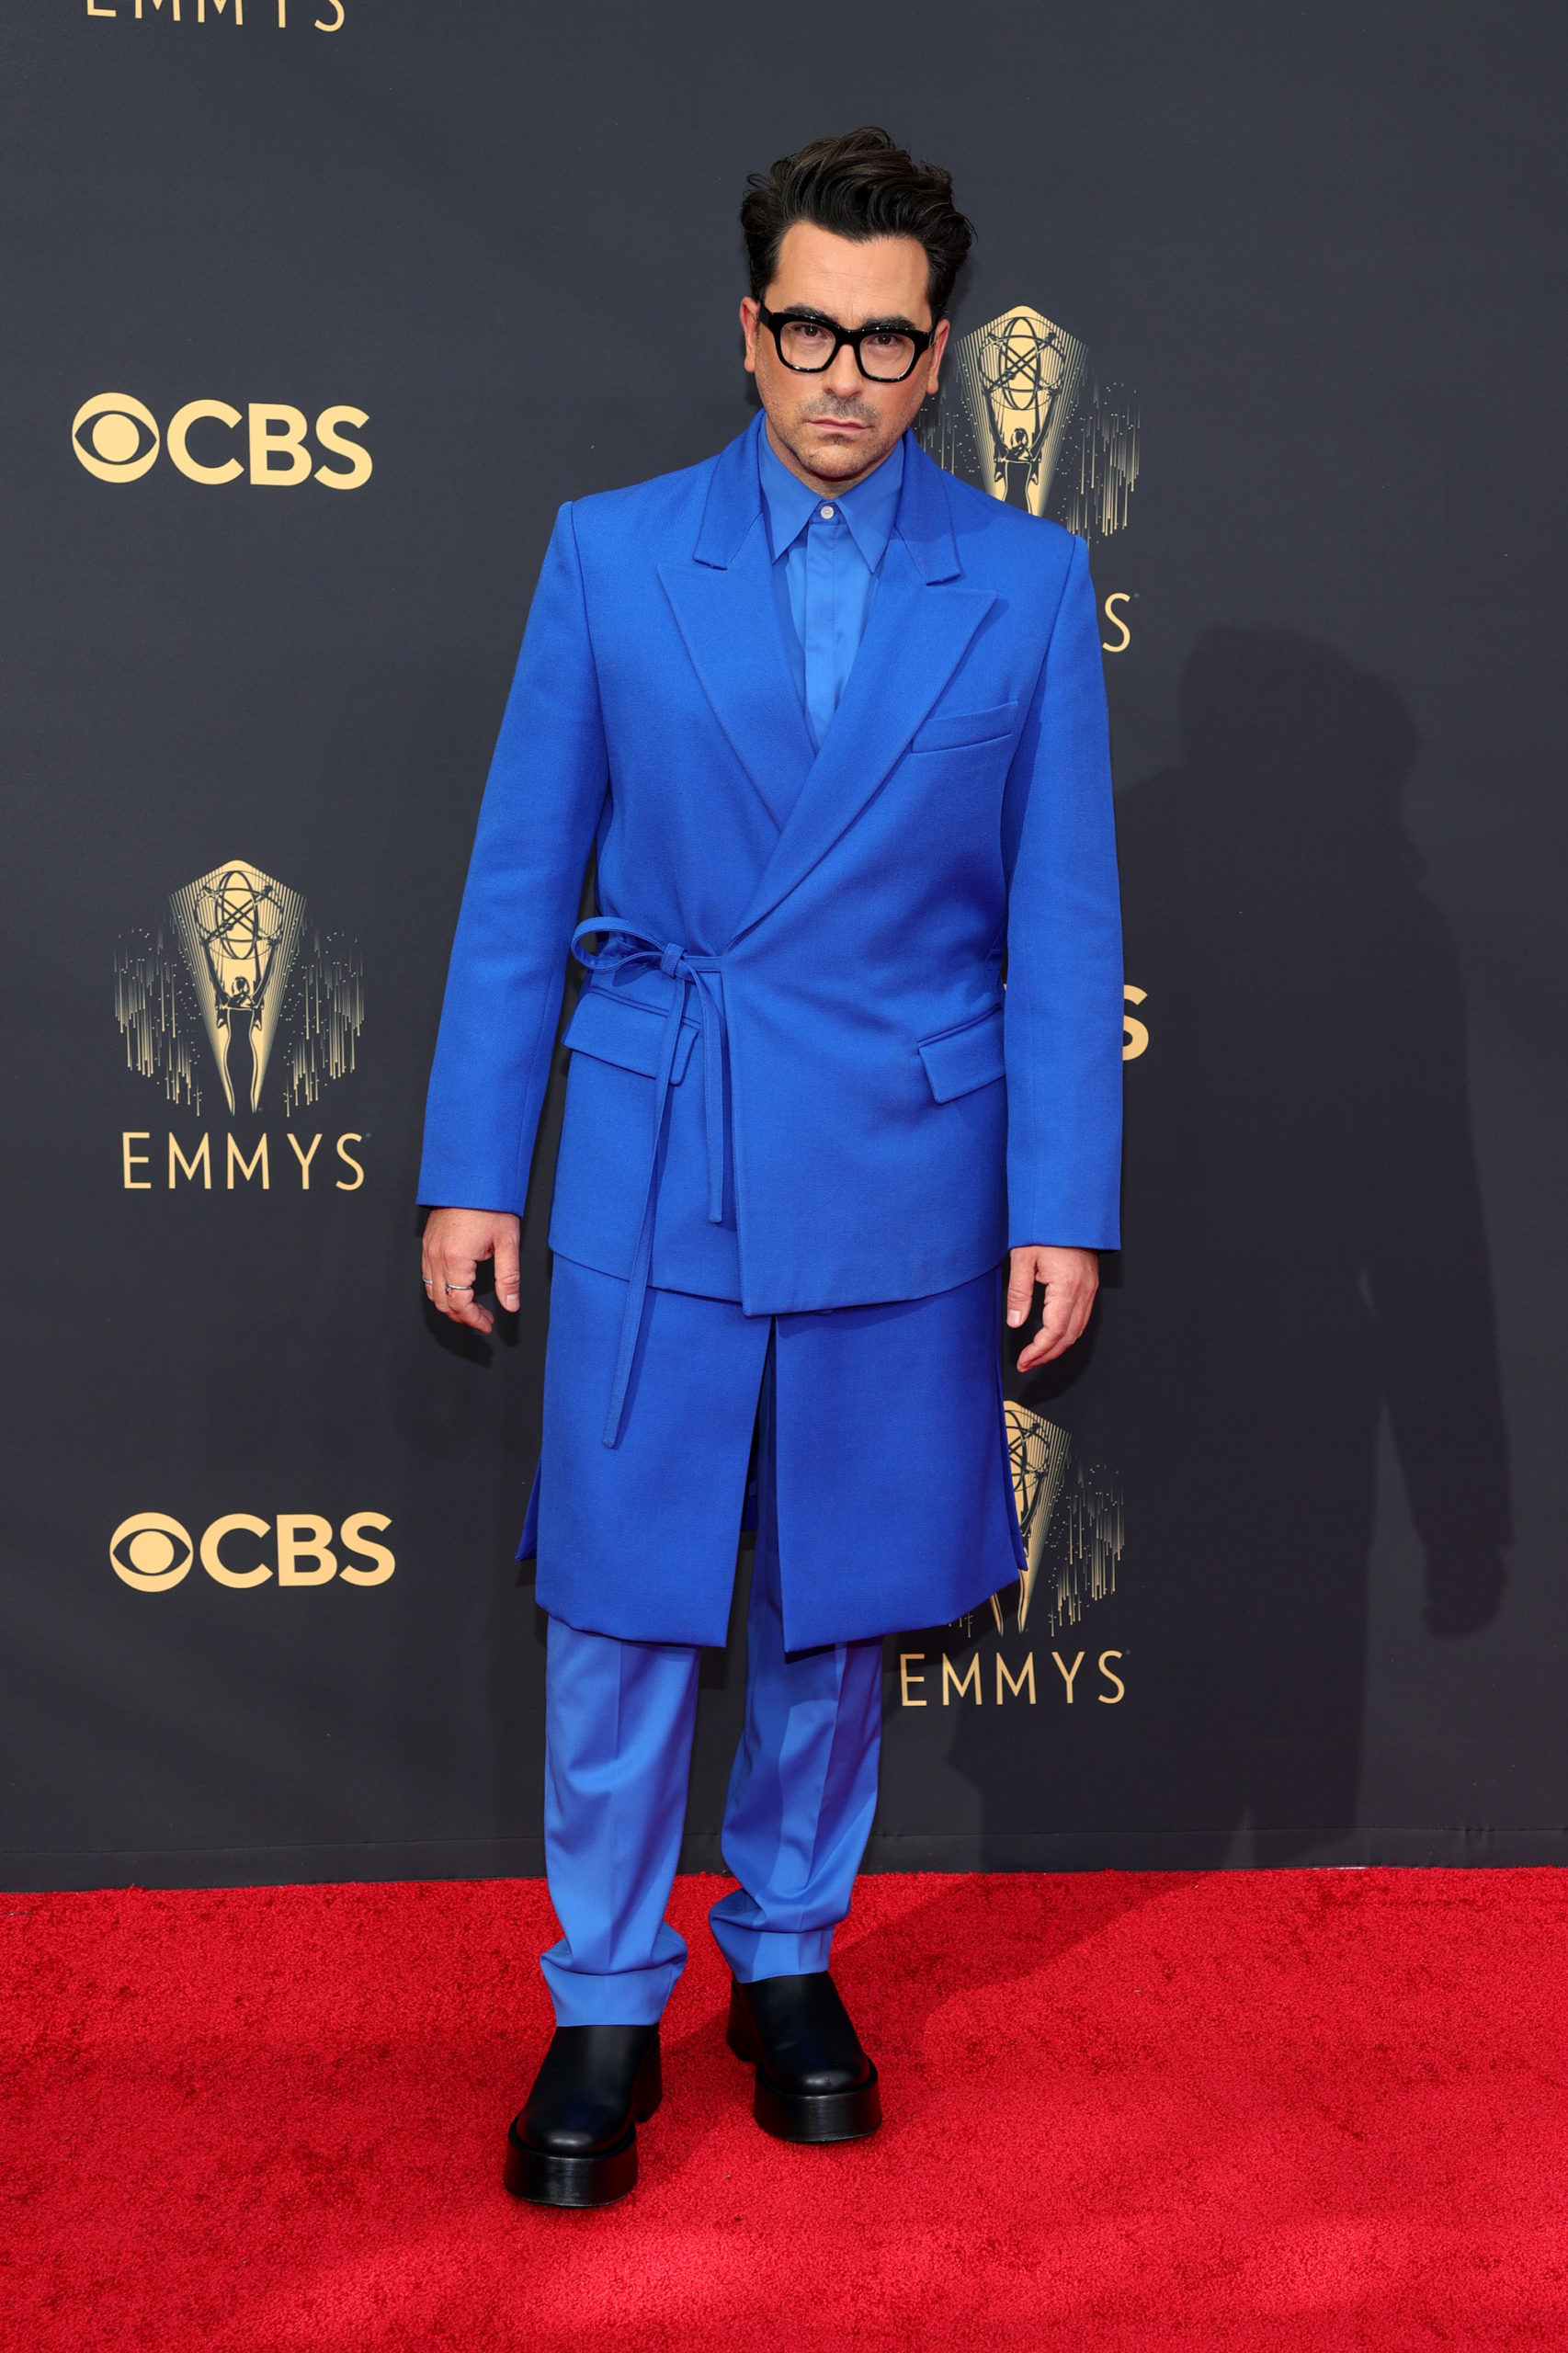 Daniel Levy at the 2021 Emmys